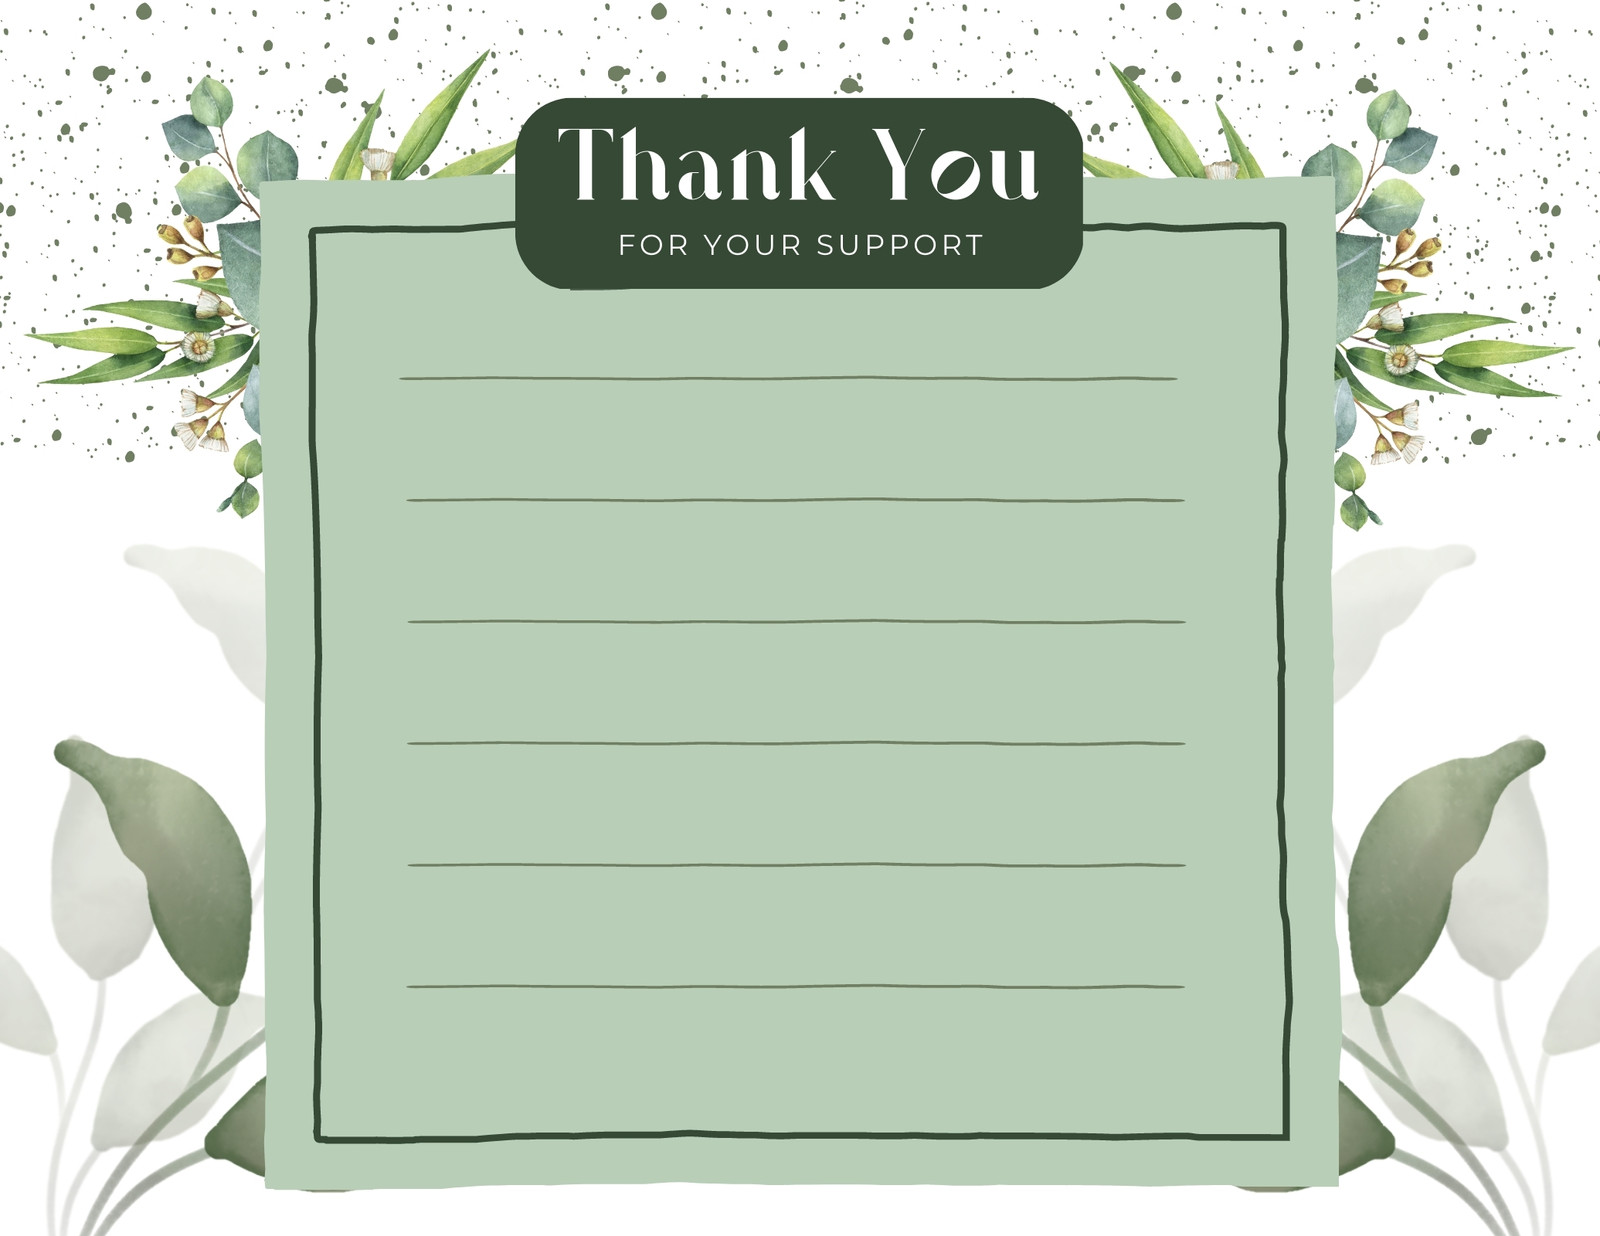 Green Vines Wedding Thank You Card - Templates by Canva